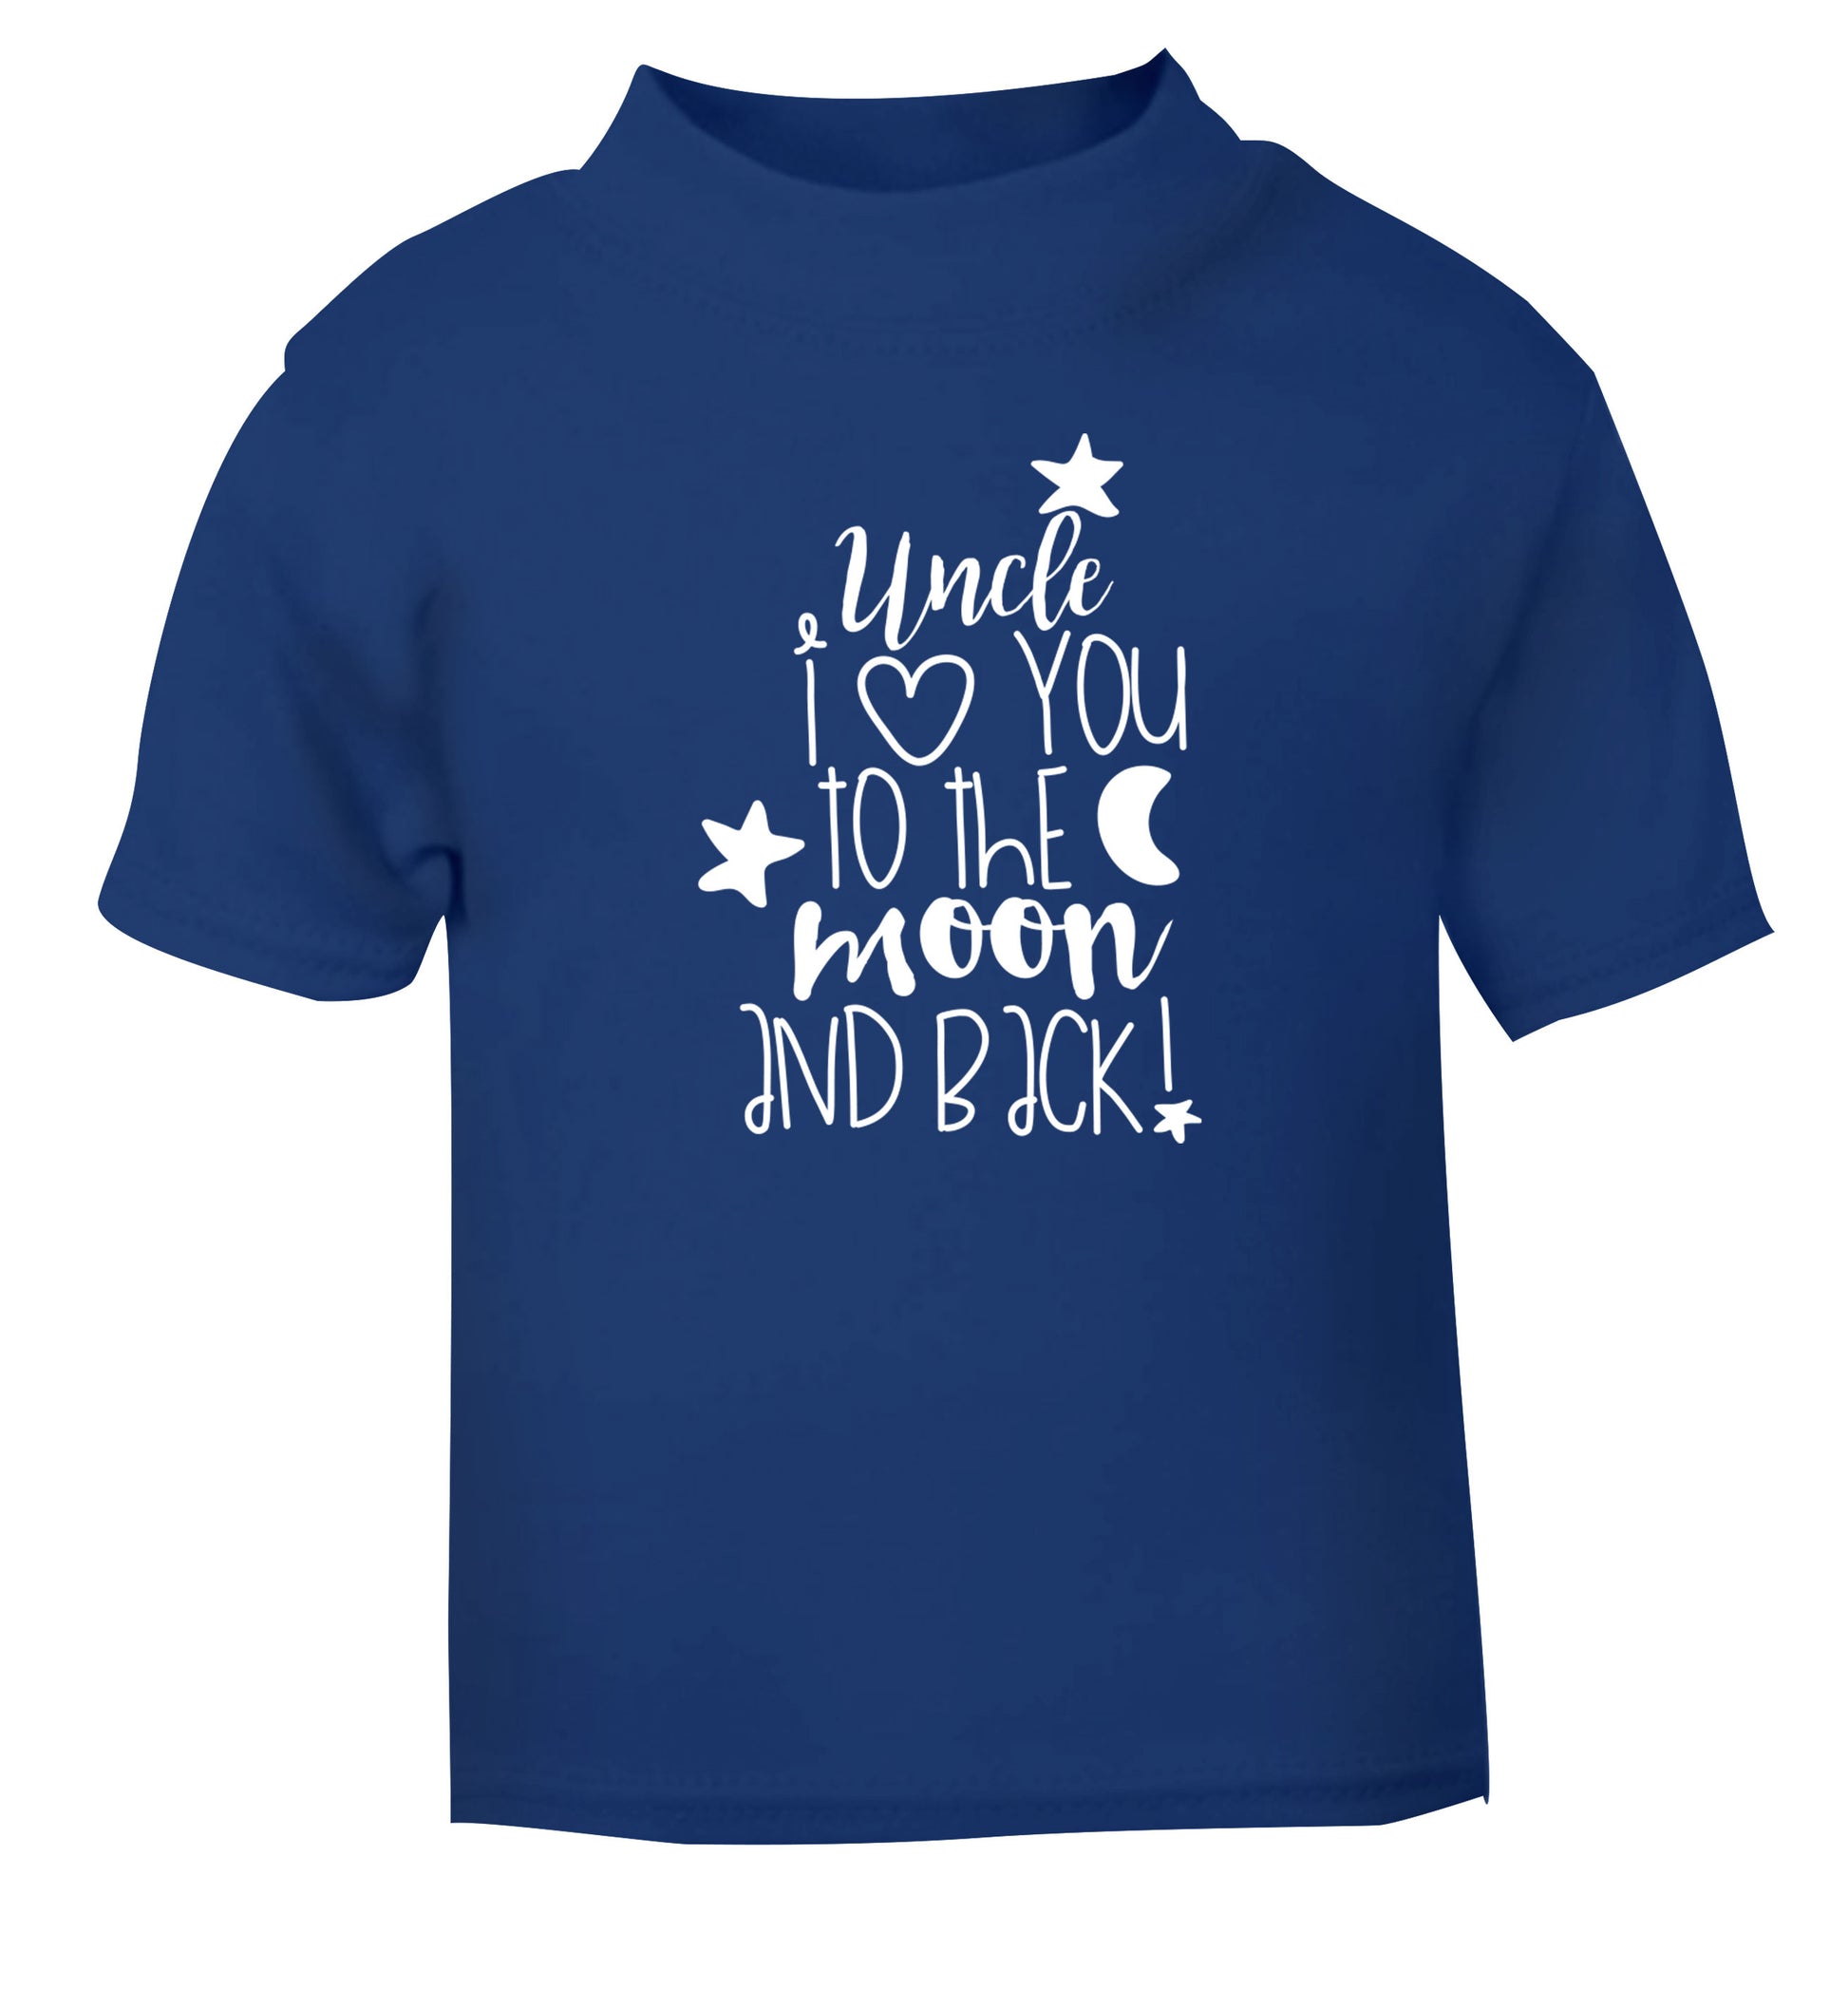 Uncle I love you to the moon and back blue Baby Toddler Tshirt 2 Years